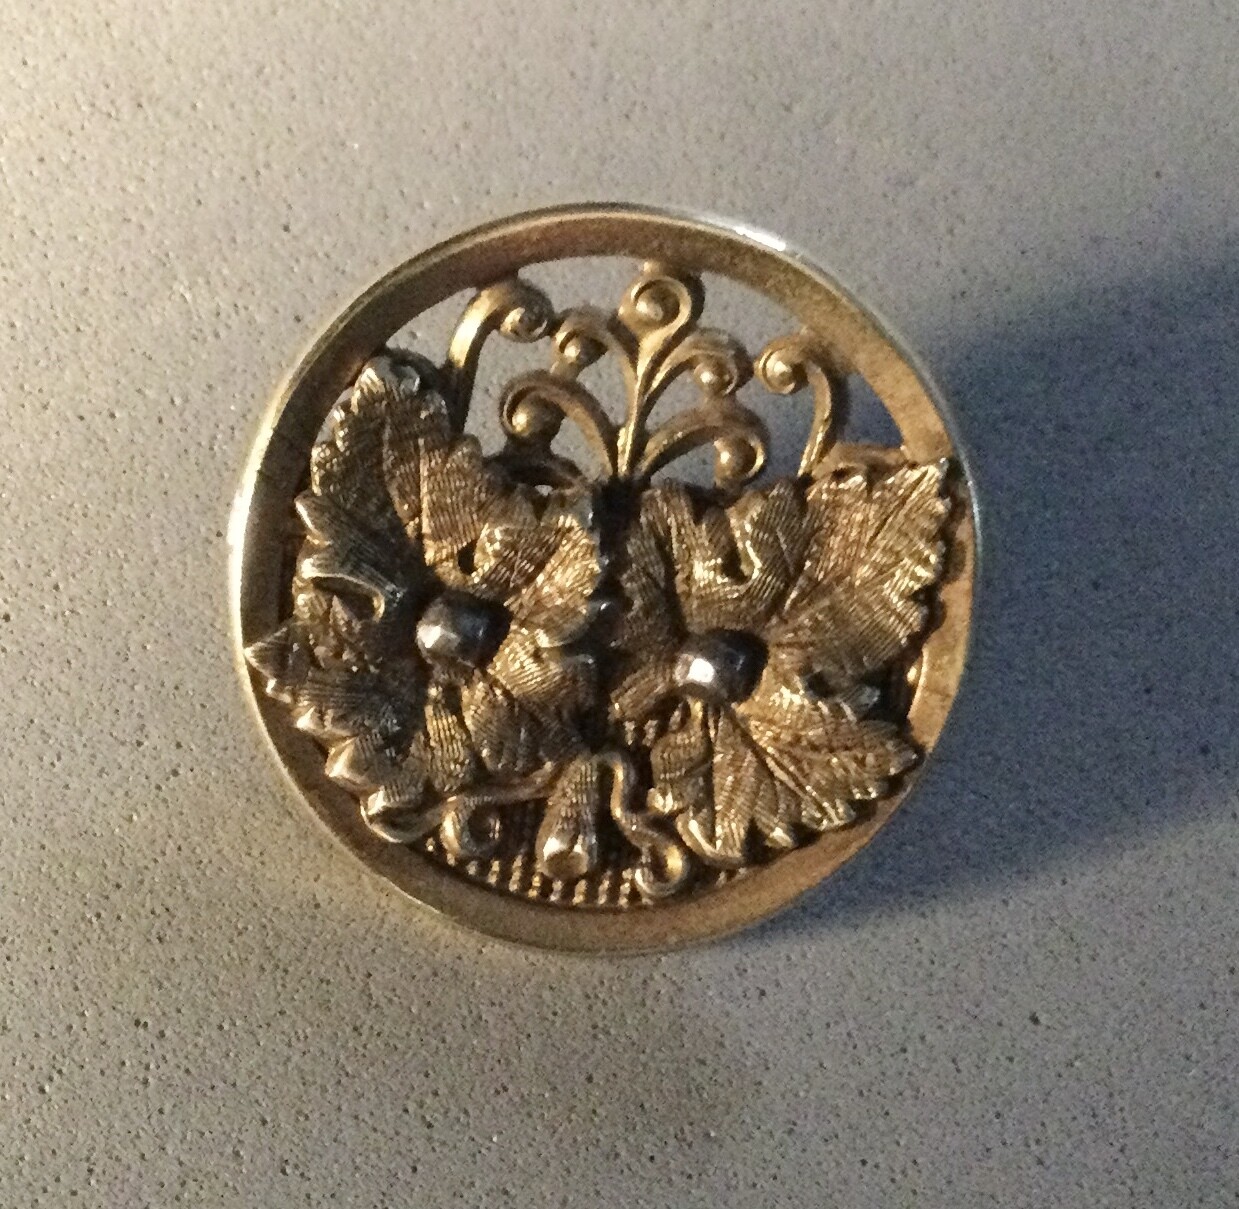 Medium Victorian Brass Button with Realistically Detailed Leaves